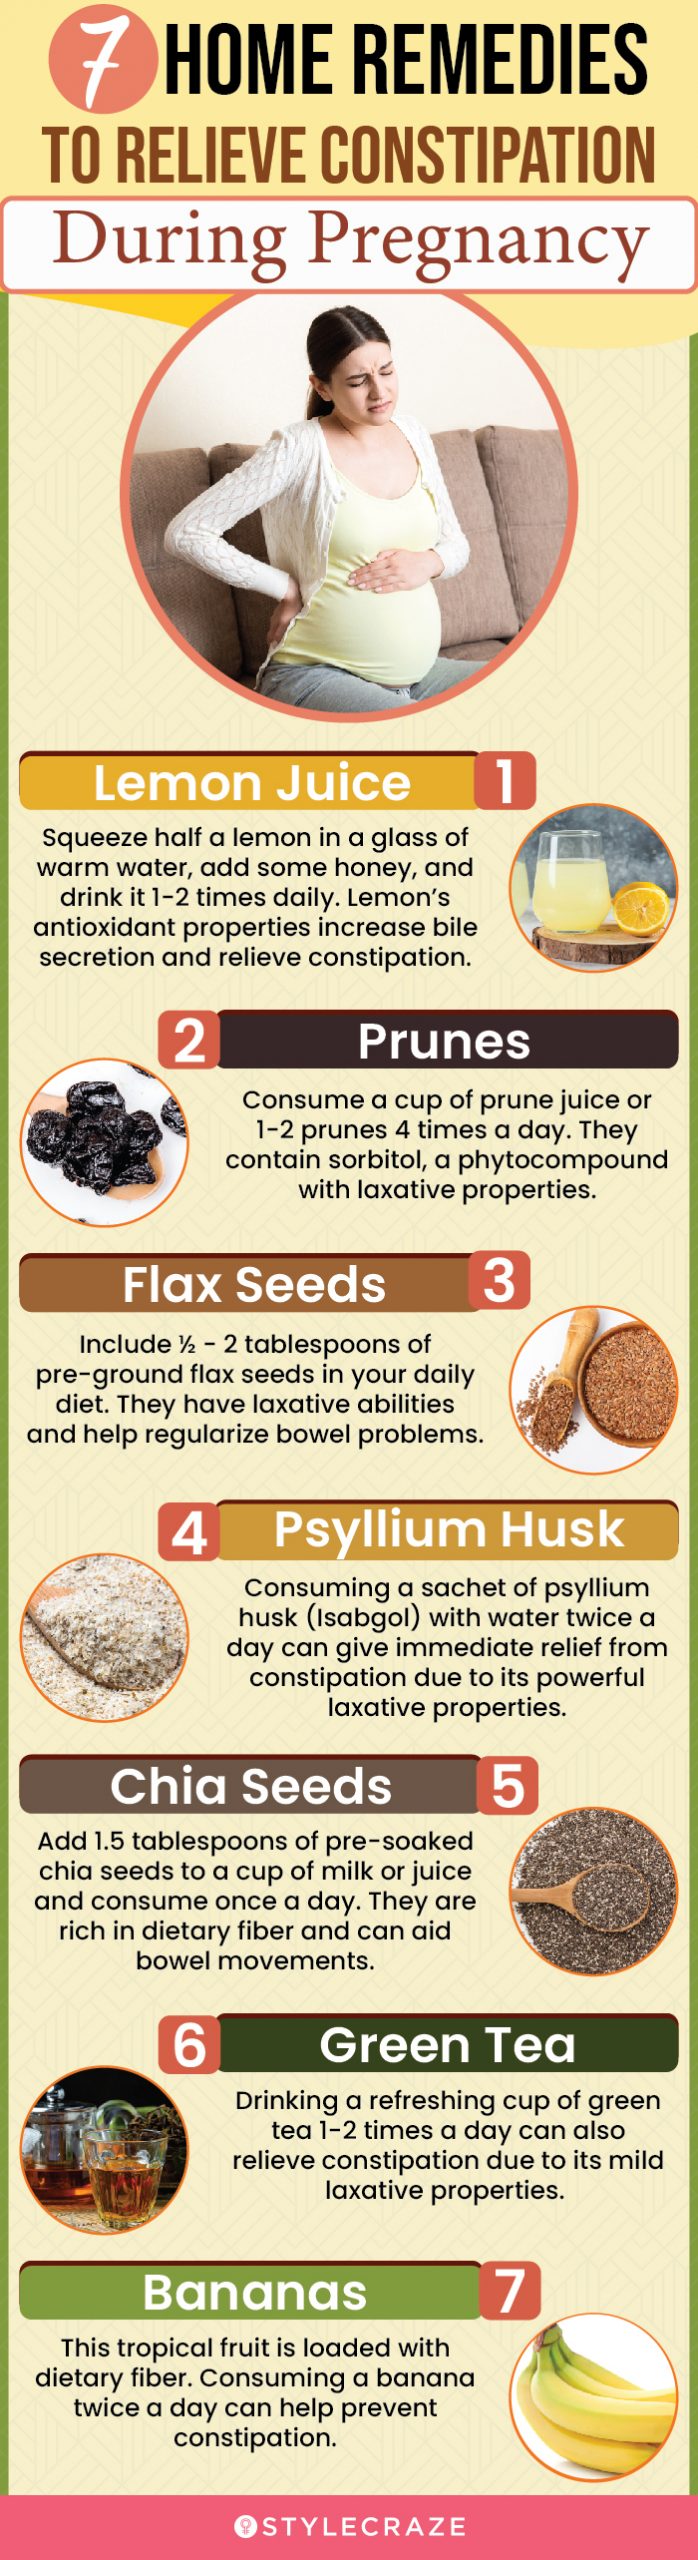 7 home remedies to relieve constipation during pregnancy (infographic)